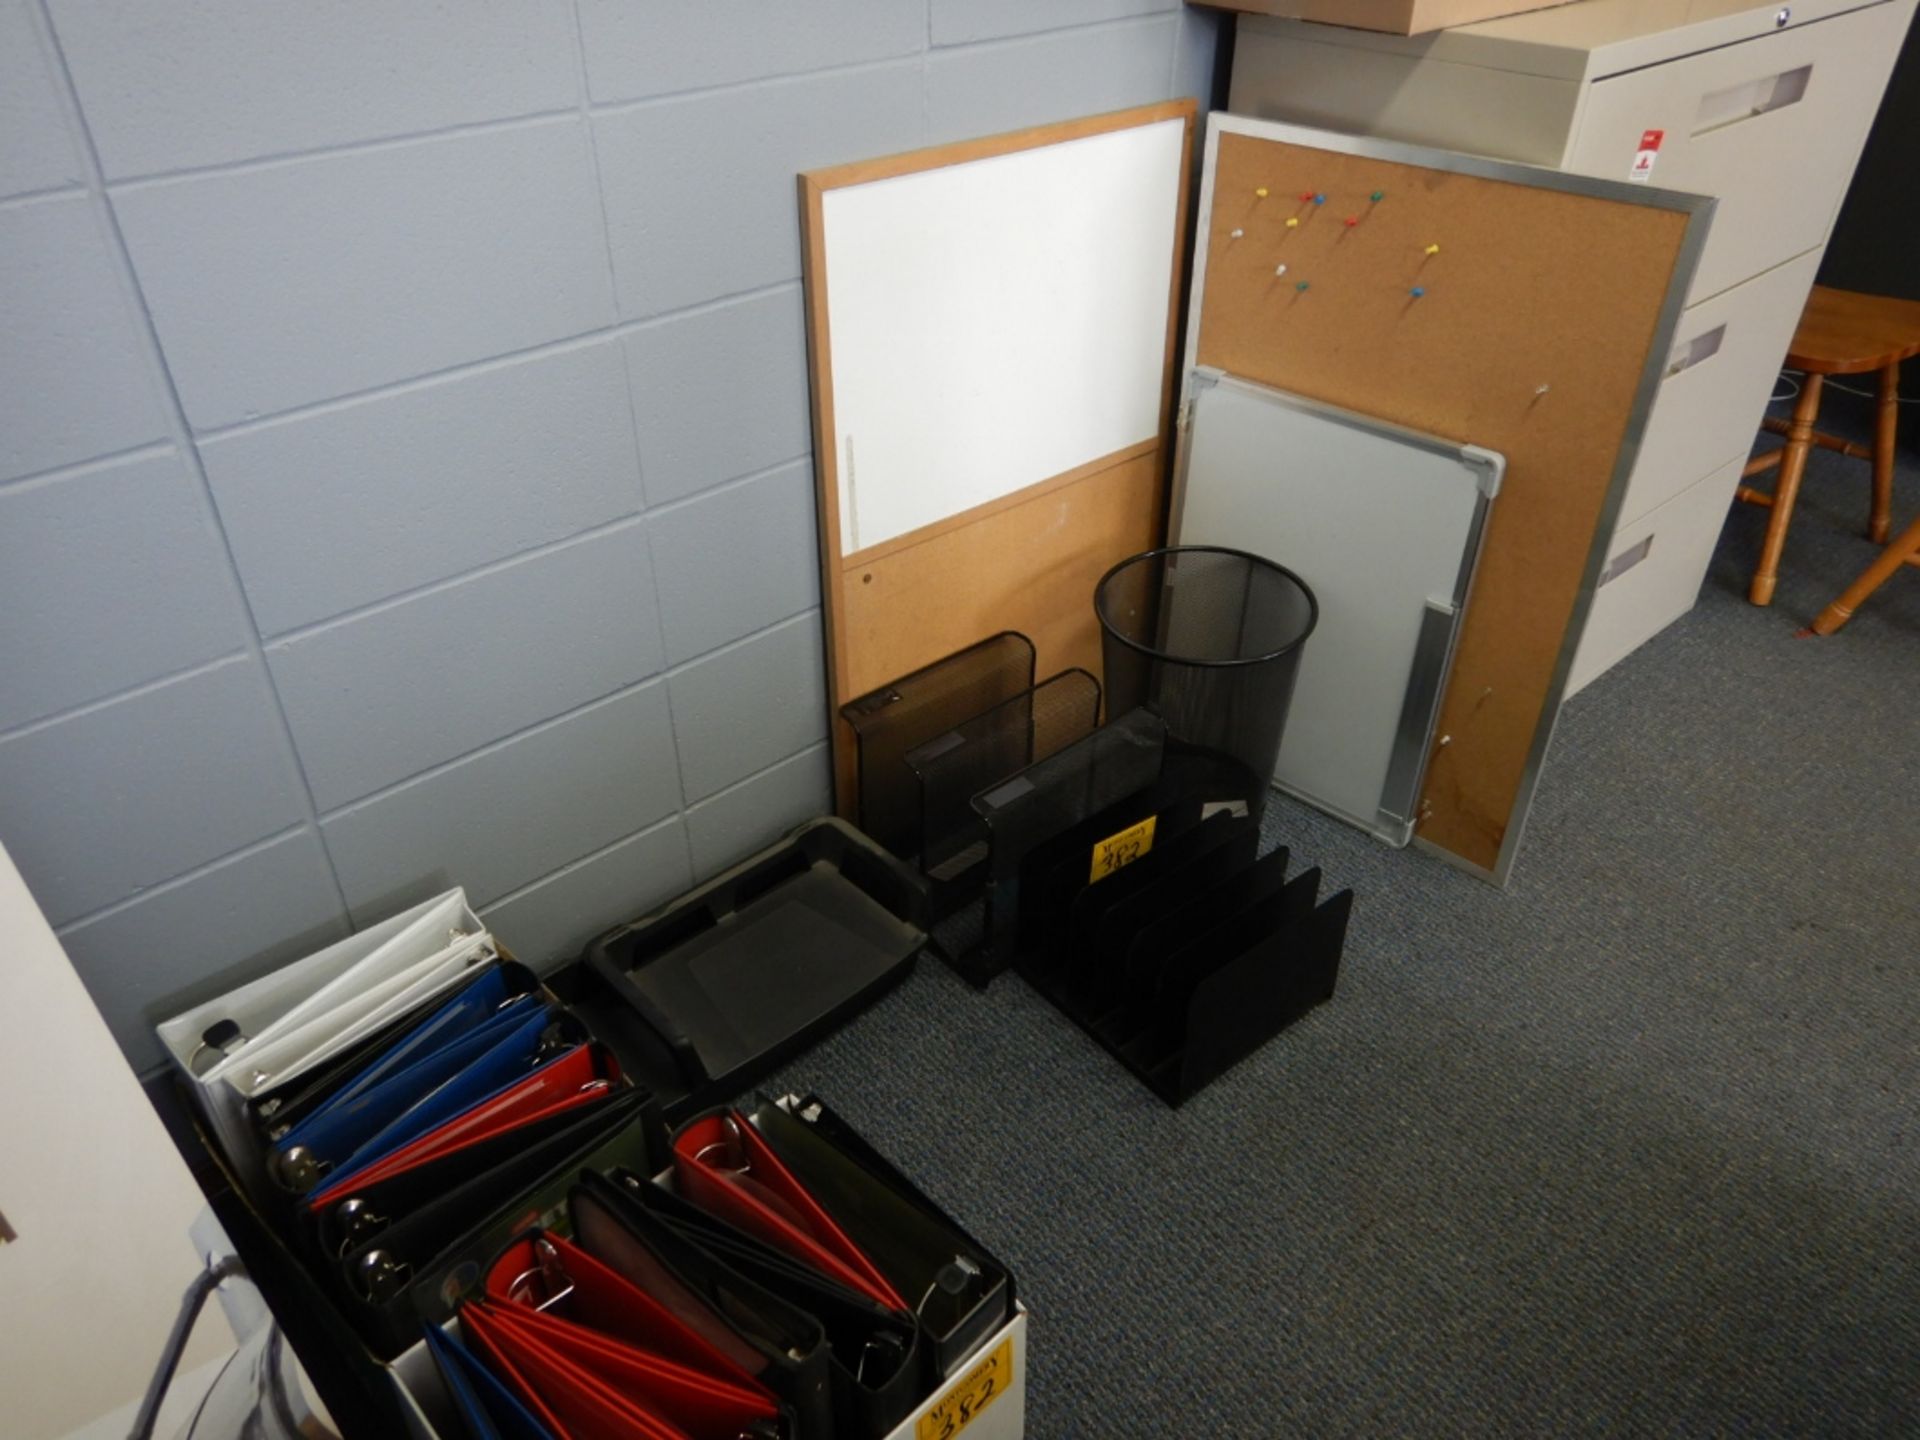 L/O MISC OFFICE SUPPLIES, BINDERS, ETC - Image 4 of 6